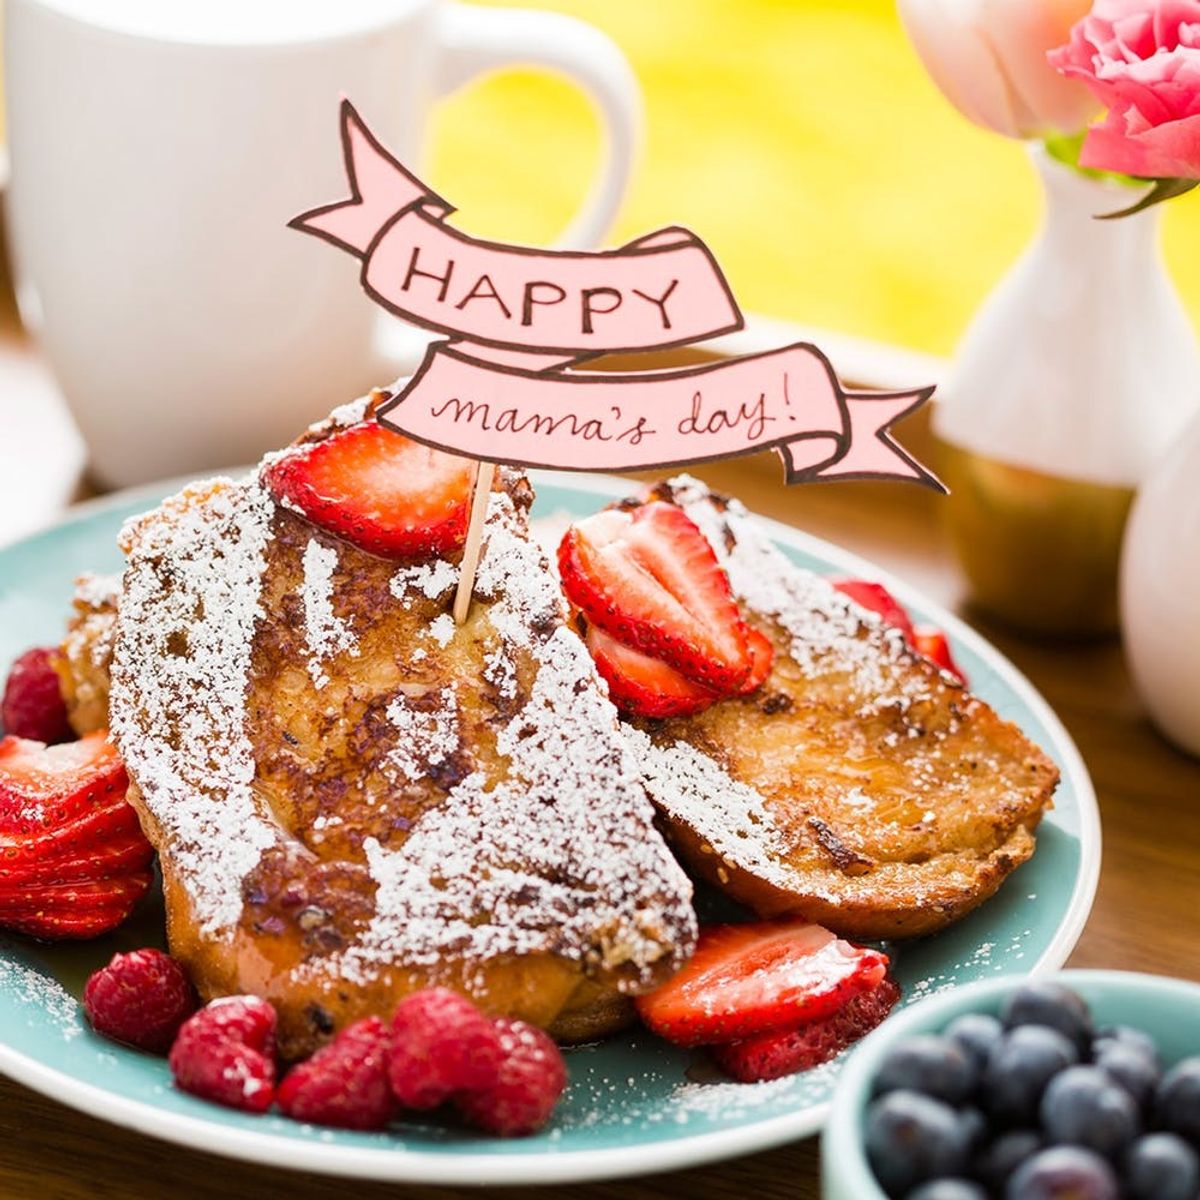 6 Things You Need for the Perfect Mother’s Day Breakfast in Bed